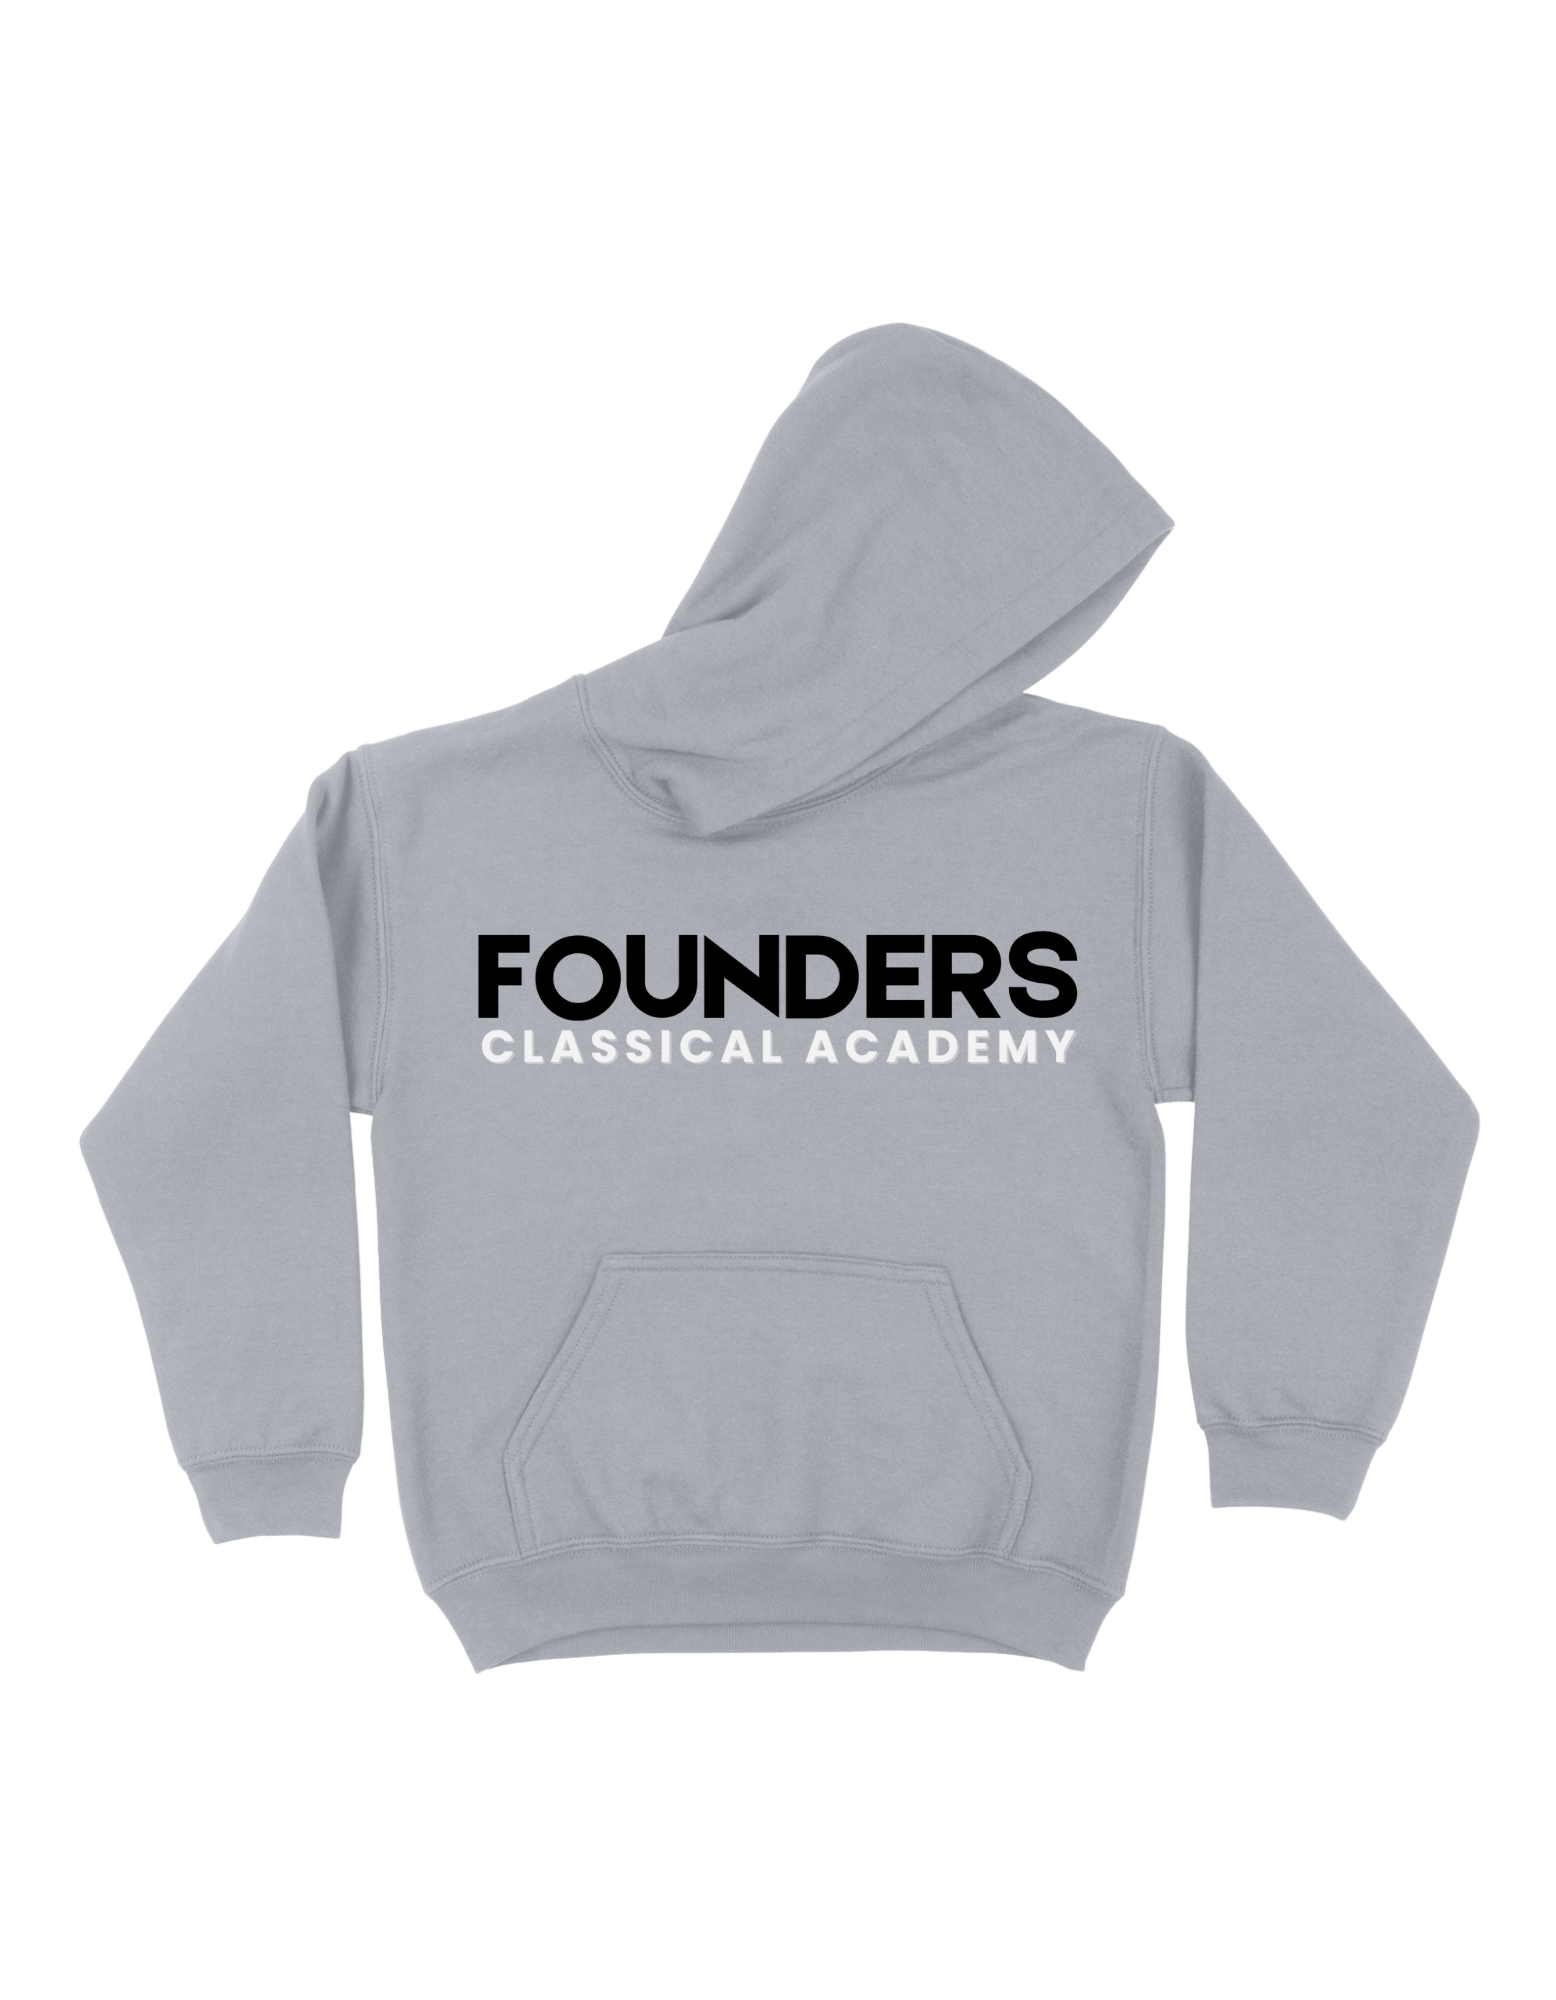 Founders Classical Academy - Black Hoodie  Large Image